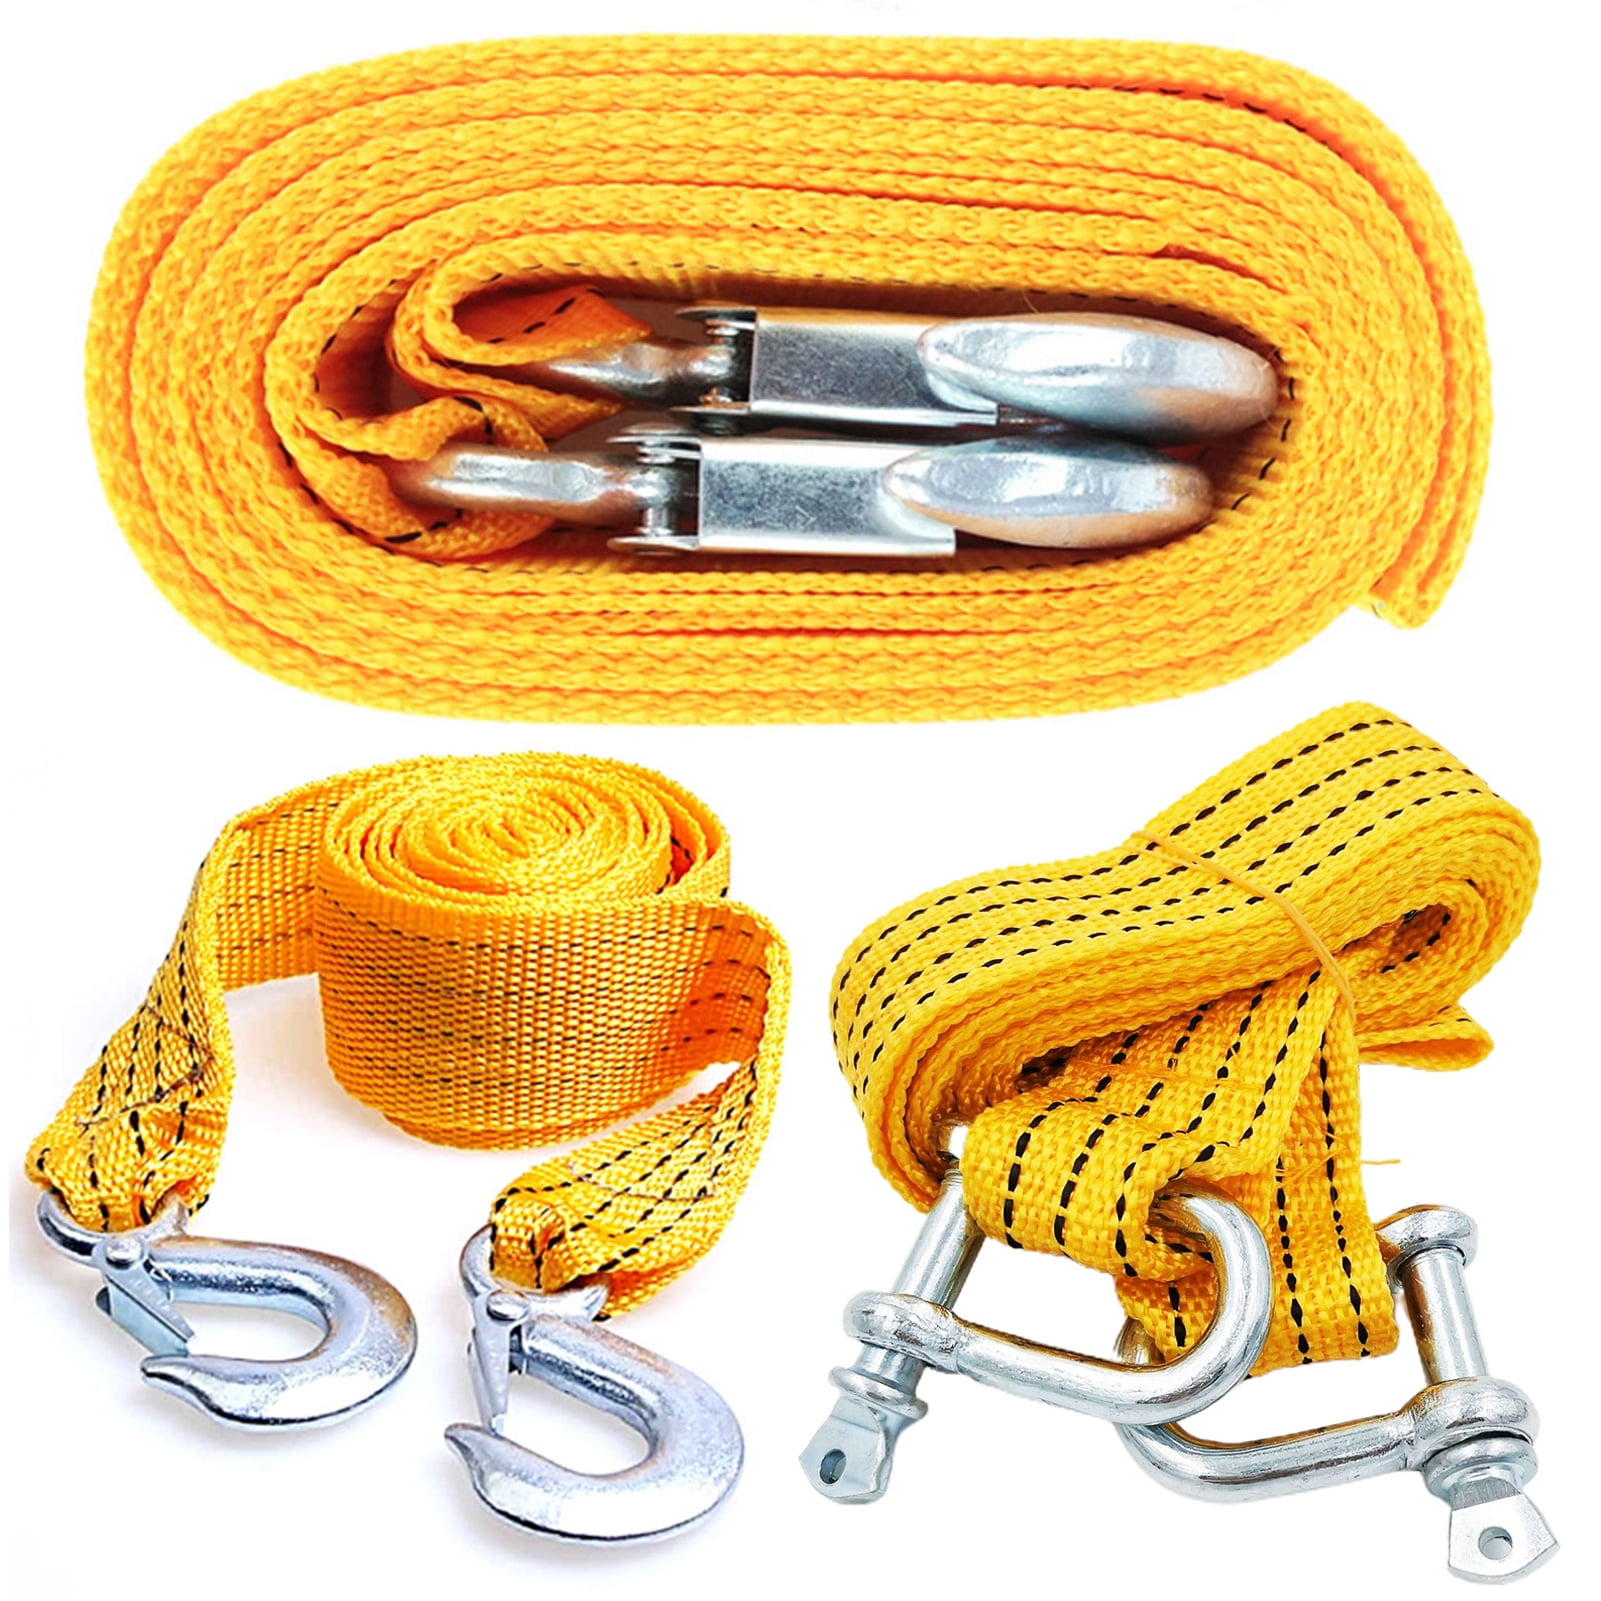 SUPVOX Tow Rope Tow Rope Heavy Duty Tow Strap Recovery Strap Tow Rope with  Hooks Tow Rope Truck Recovery Tow Strap Towing Strap Rope Car Chain Car